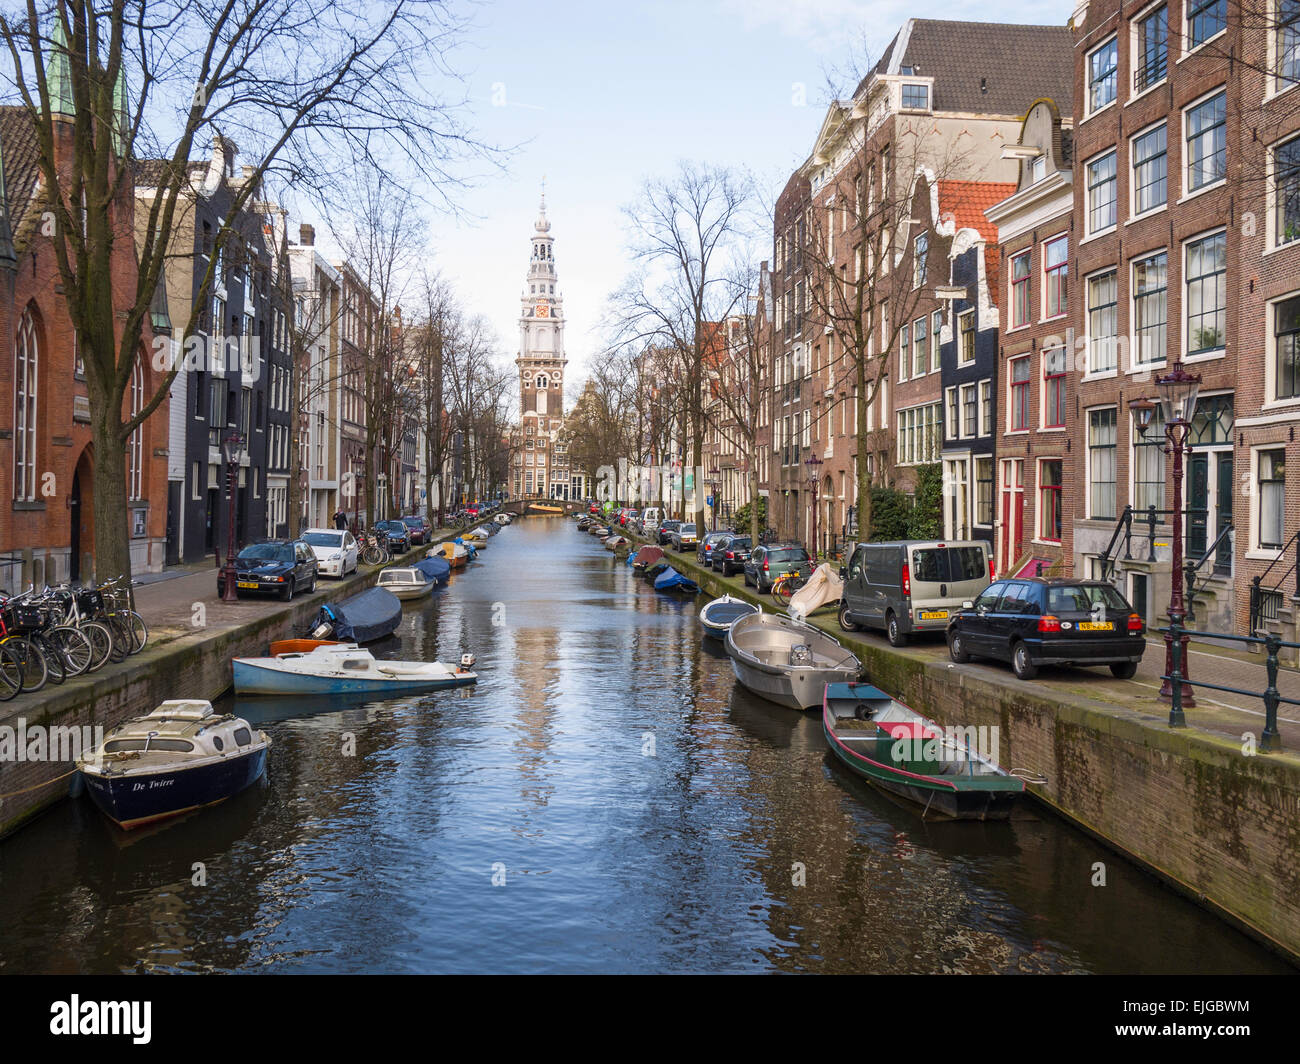 View along Groenburgwal canal towards the tower of Zuiderkerk ('South Church') (1603-1611), Amsterdam, Netherlands. Stock Photo